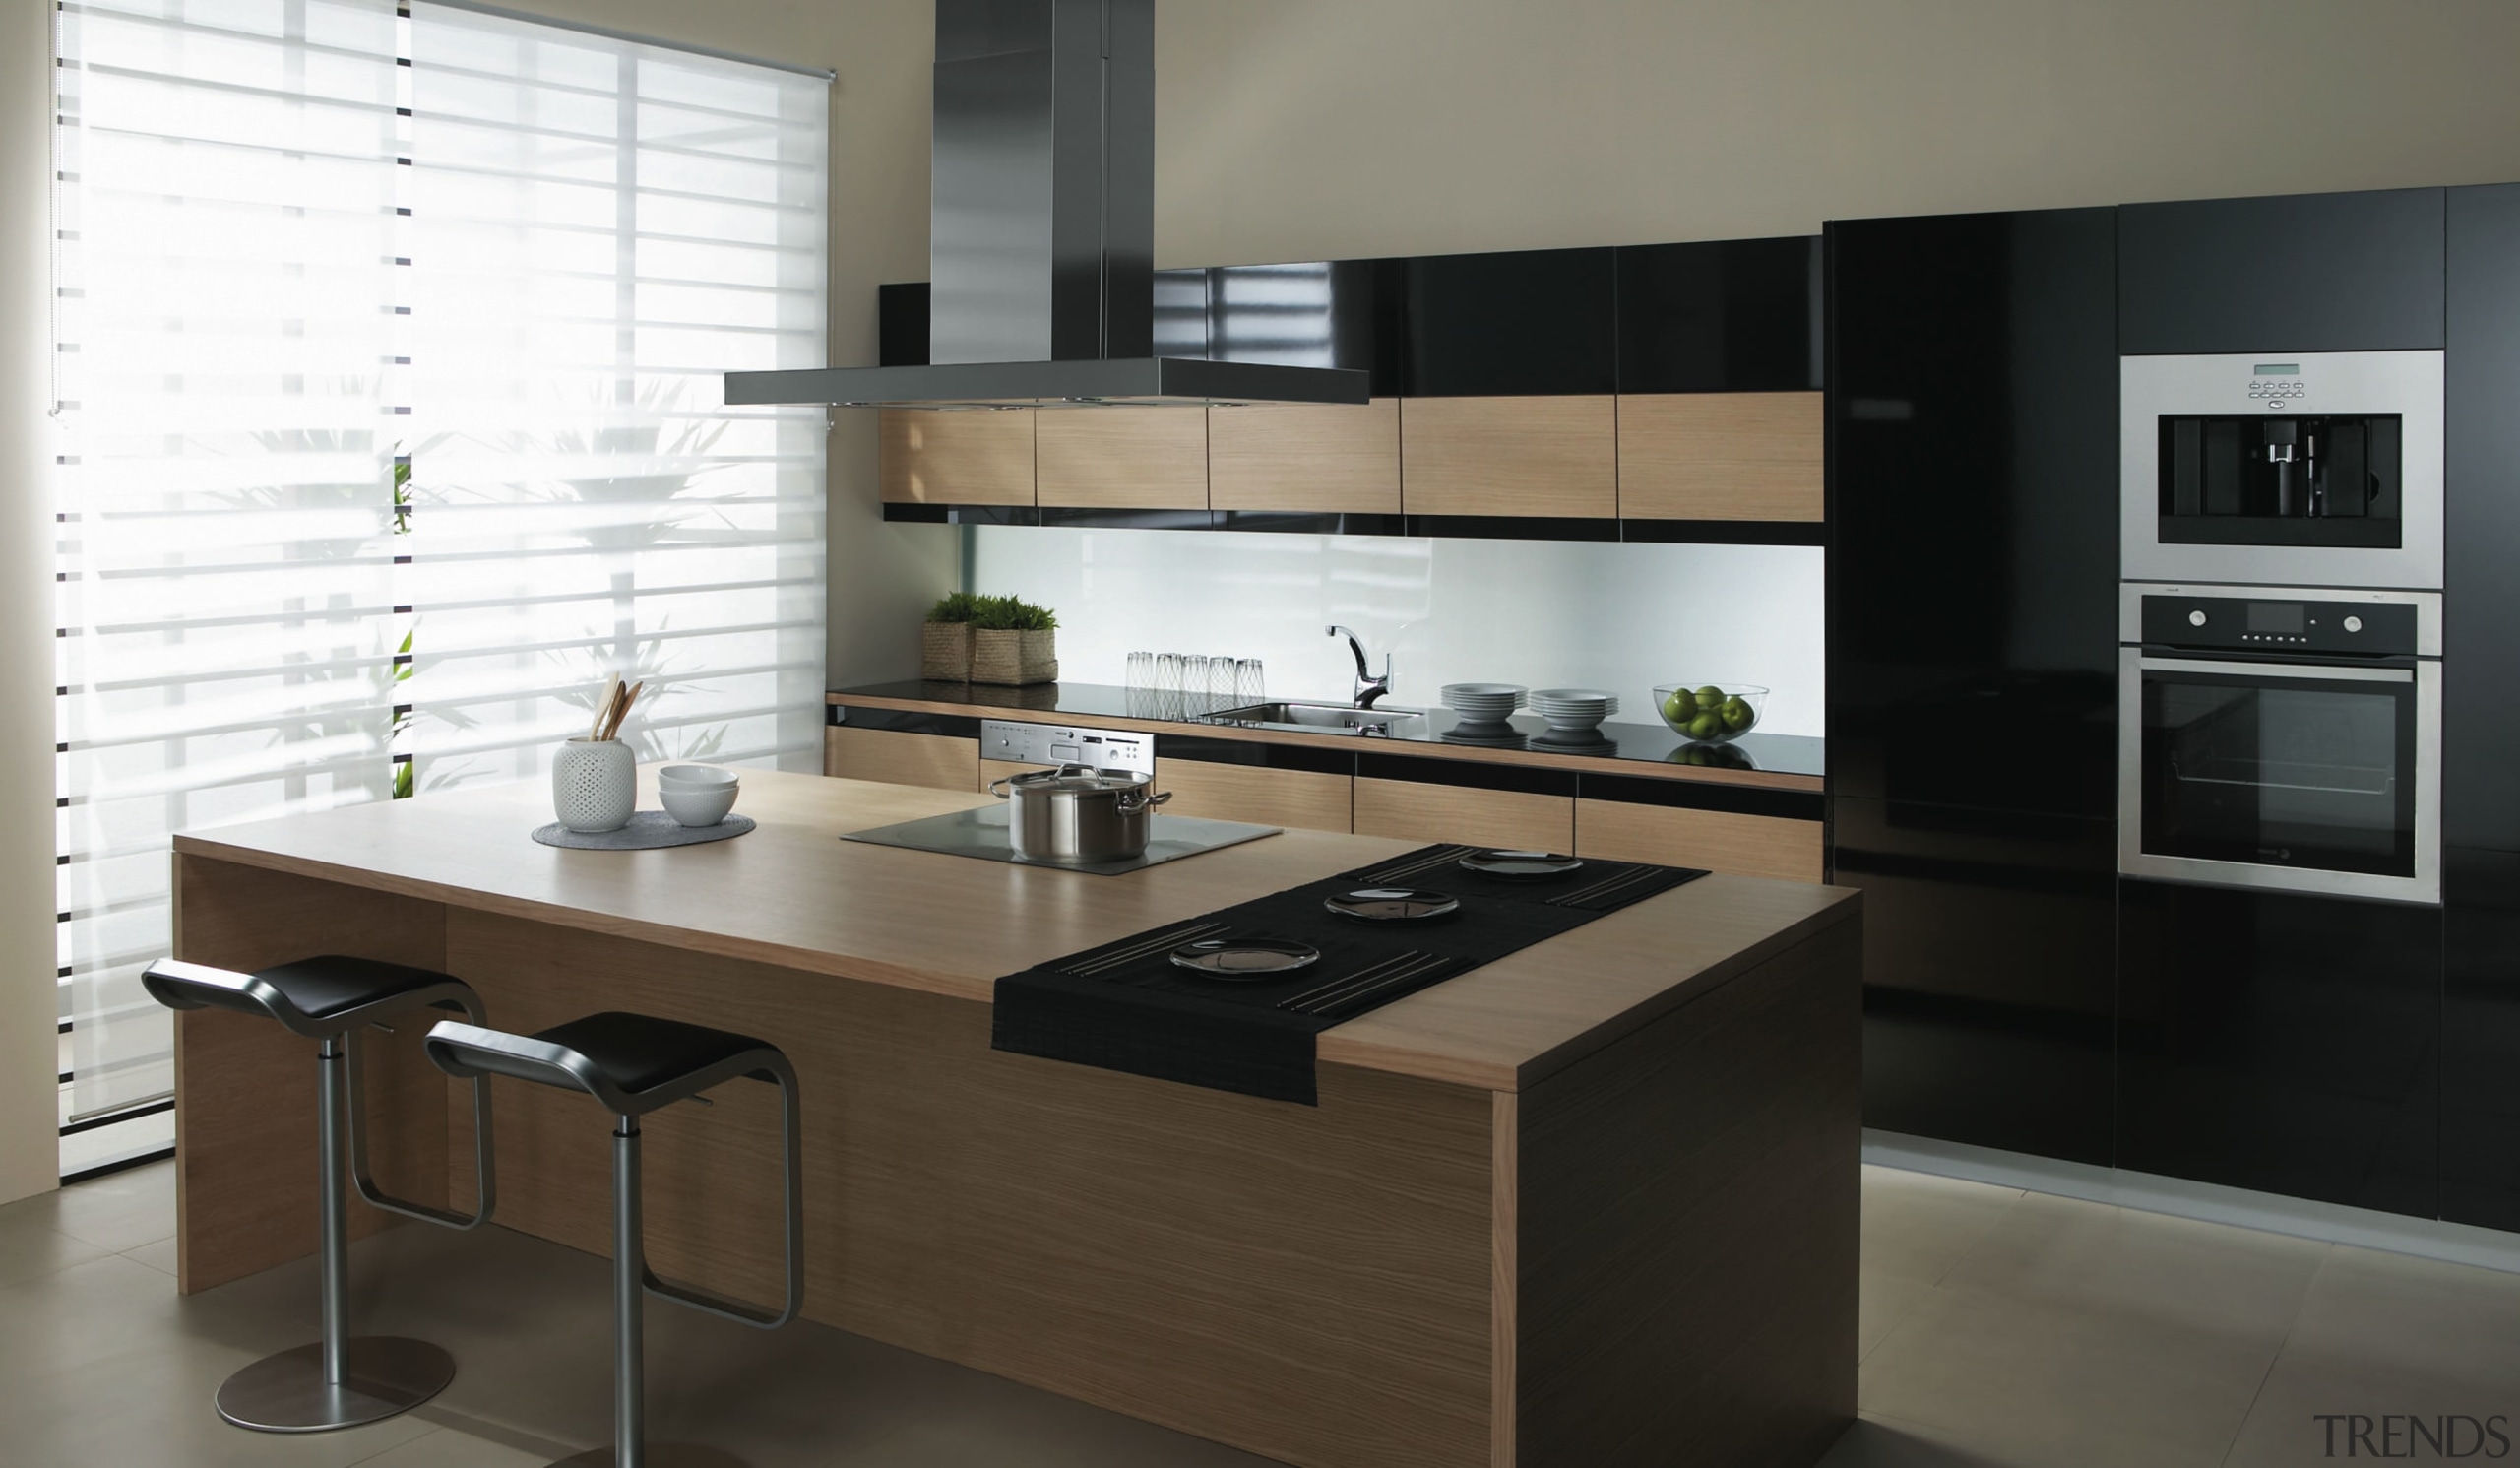 With a fully integrated kitchen design, appliances are cabinetry, countertop, cuisine classique, furniture, home appliance, interior design, kitchen, product design, black